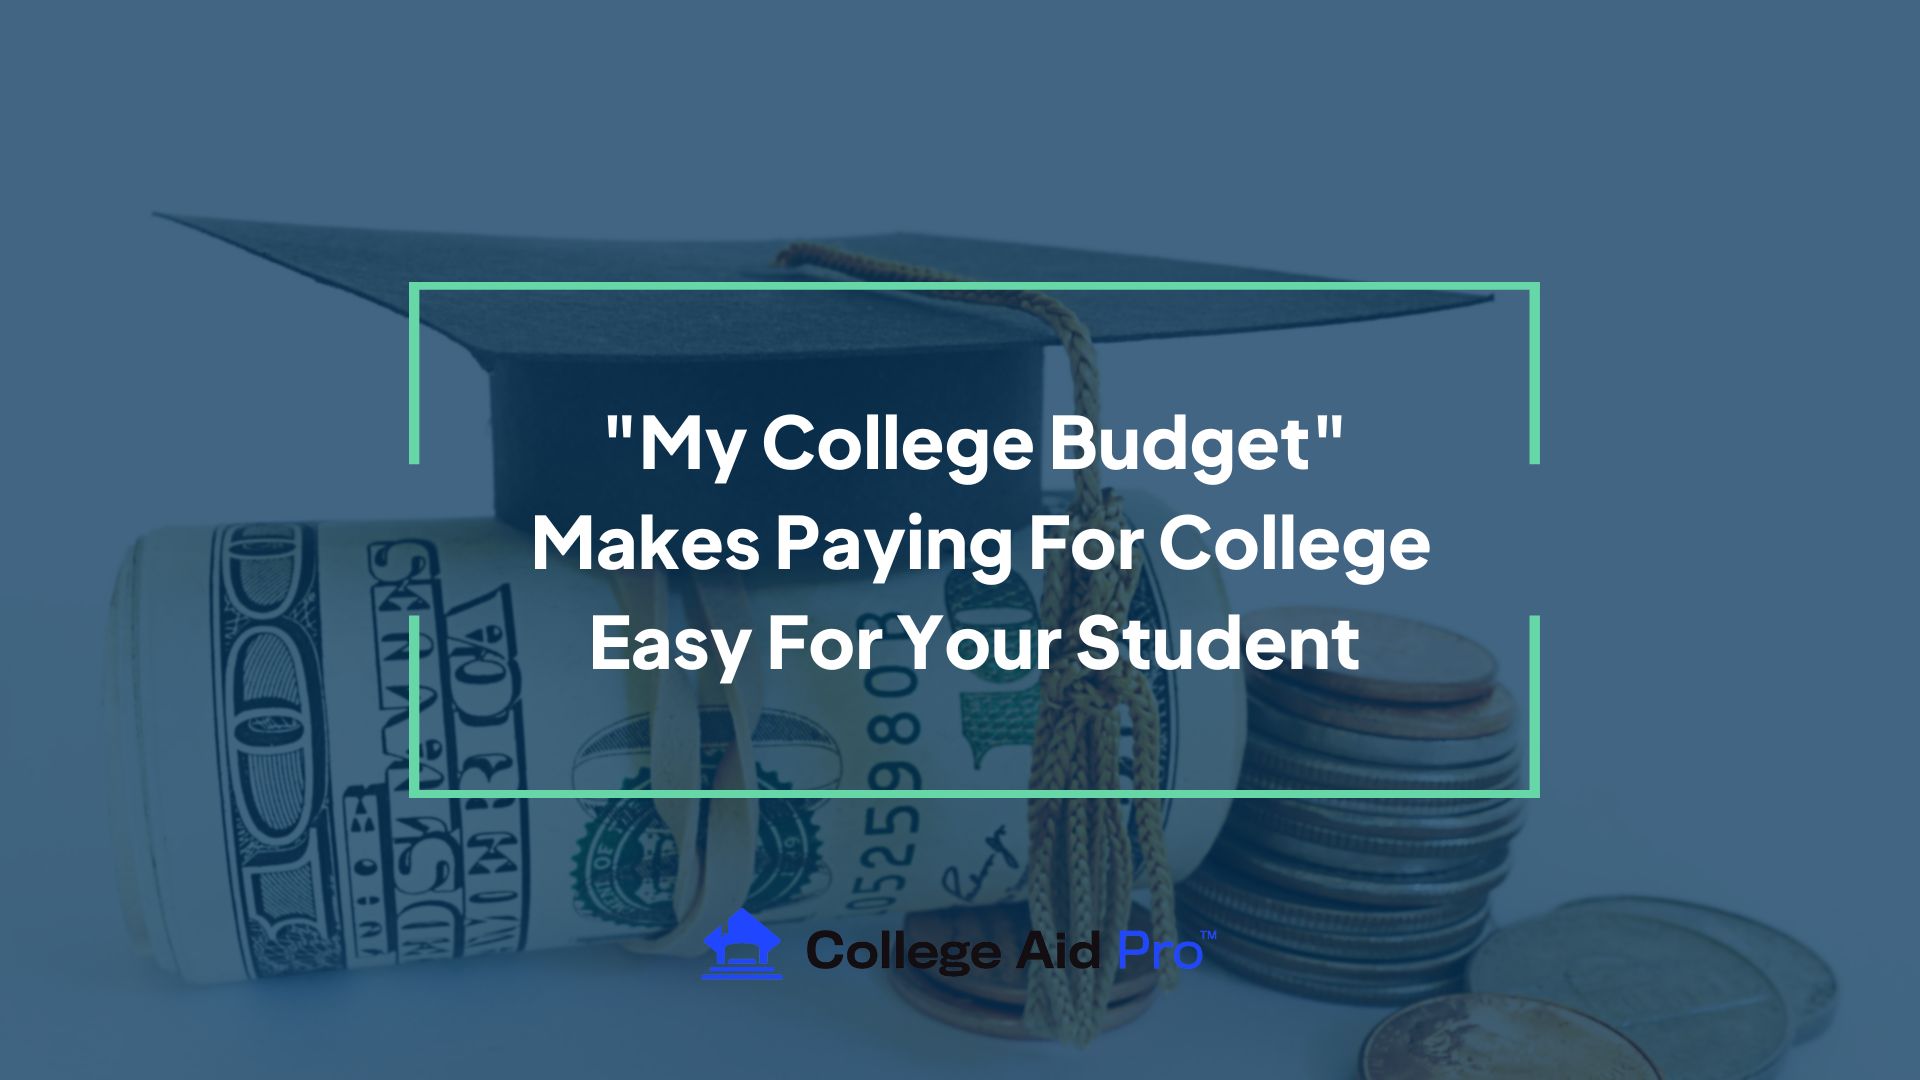 coins, dollars, college budget, paying for college